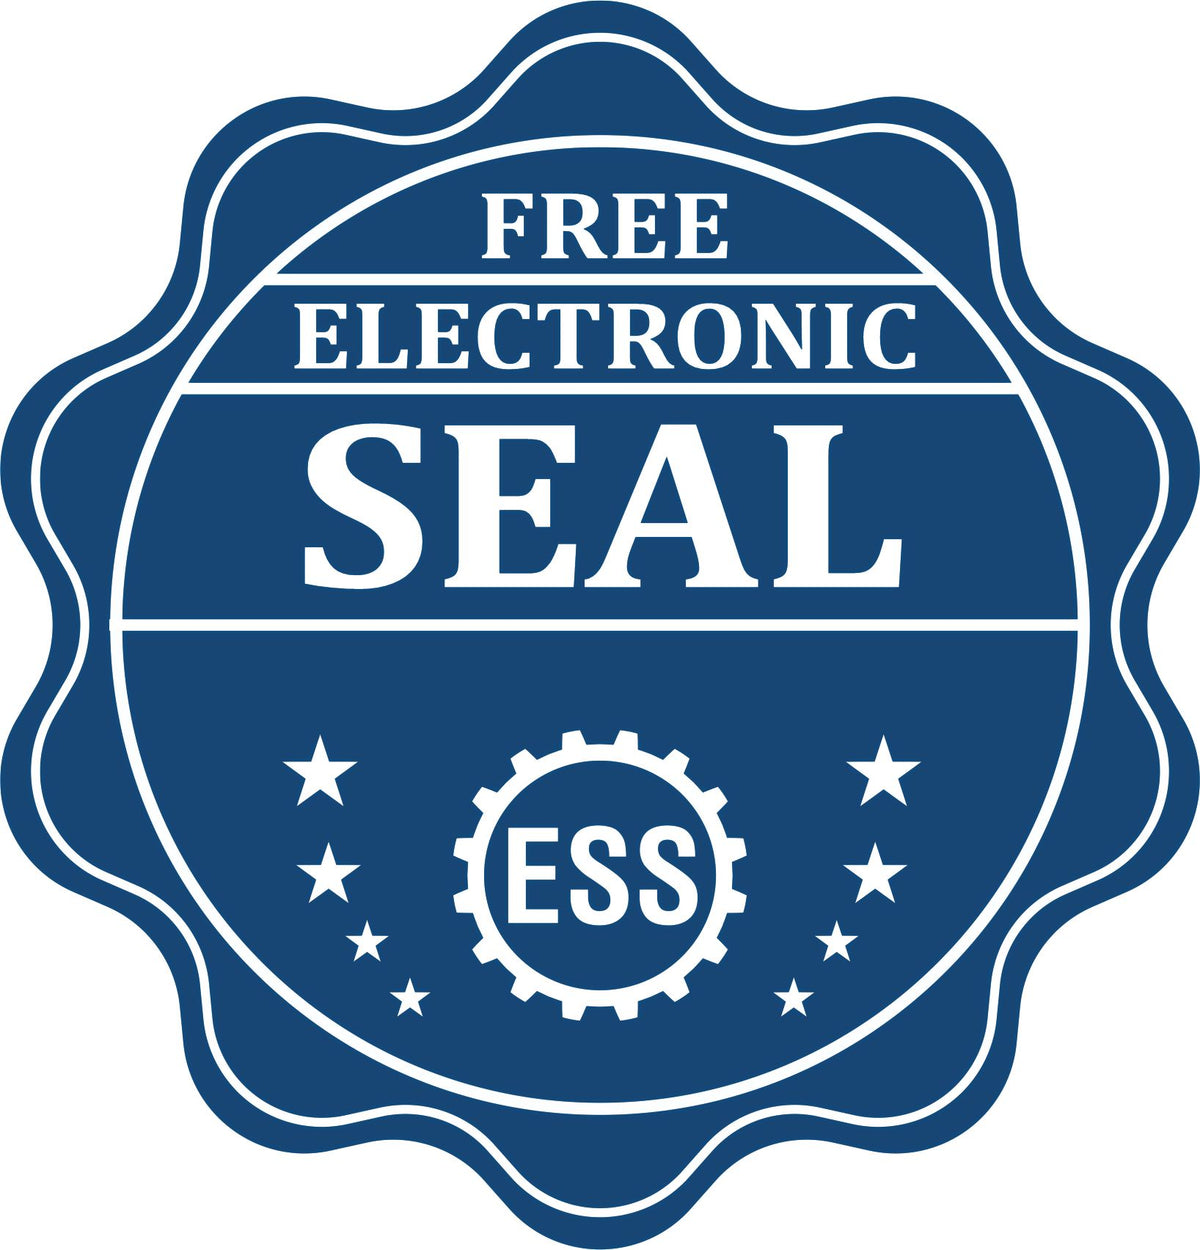 A badge showing a free electronic seal for the Slim Pre-Inked Utah Professional Geologist Seal Stamp with stars and the ESS gear on the emblem.